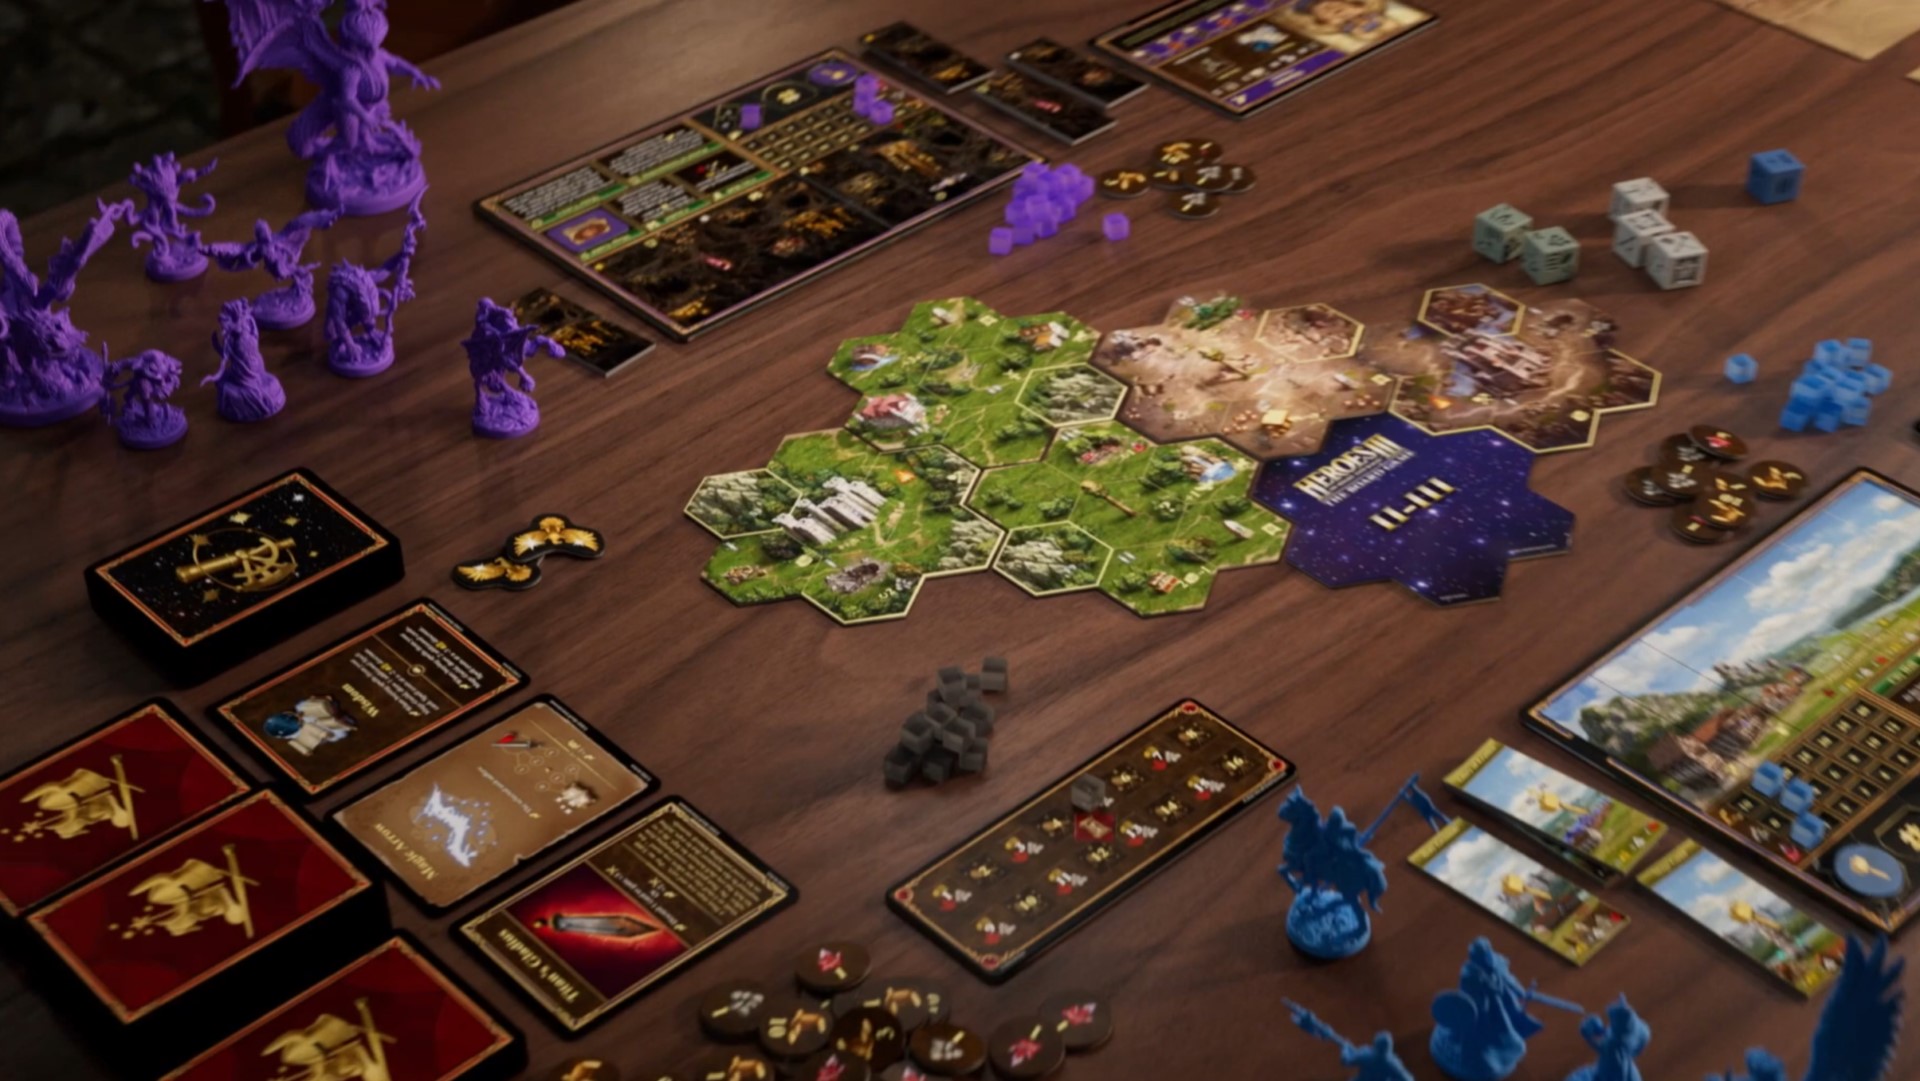 Heroes of Might and Magic 3 is becoming a board game